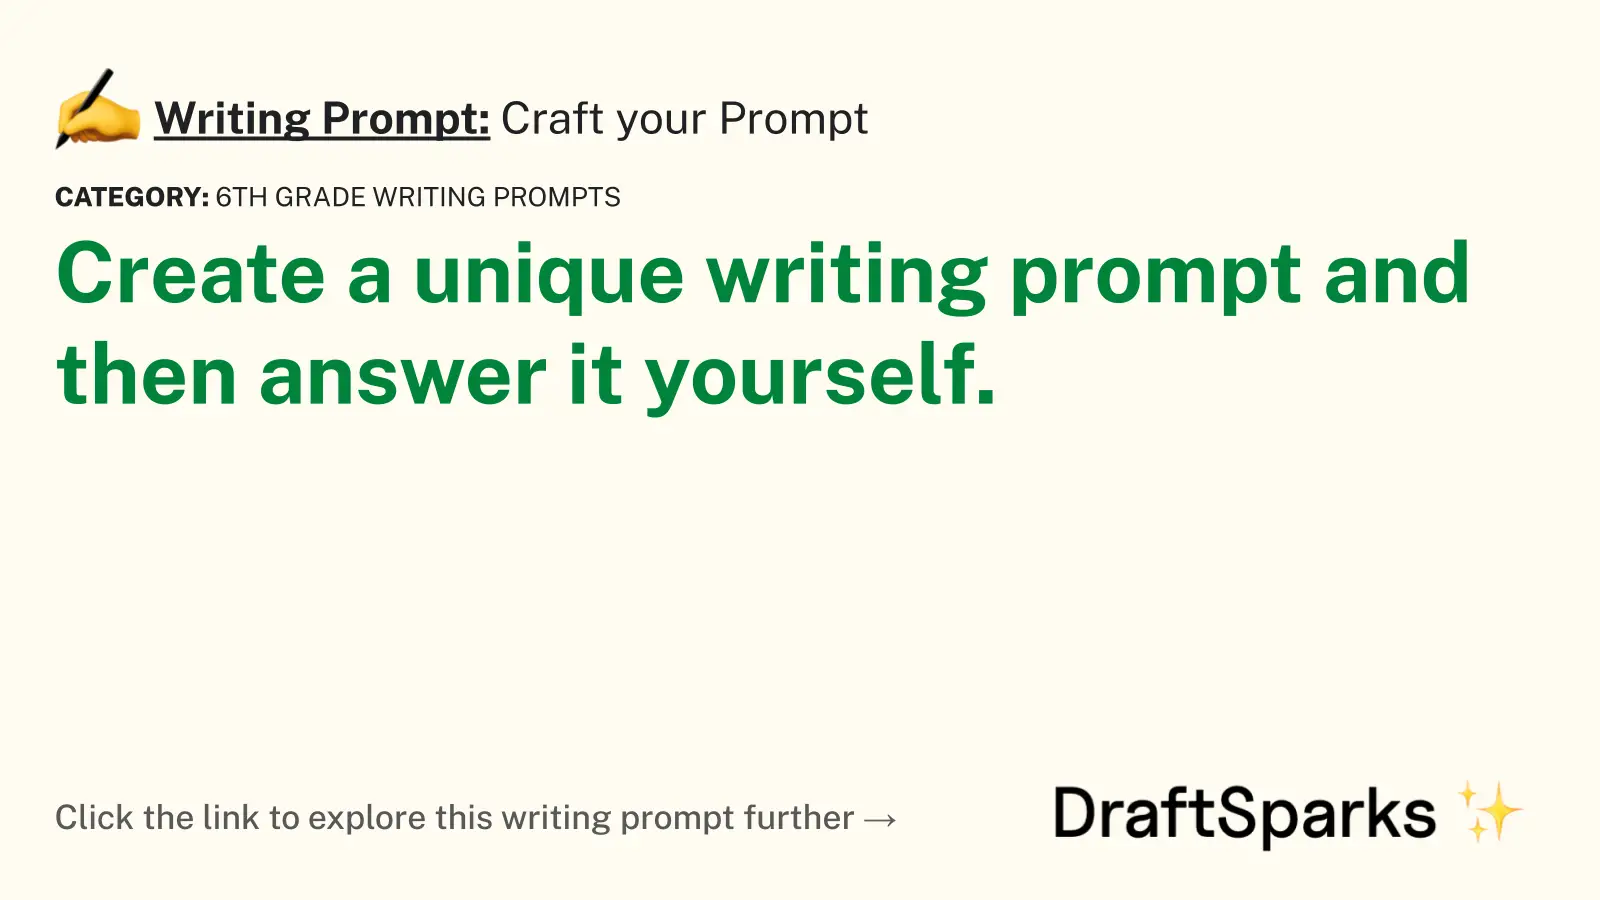 Craft your Prompt